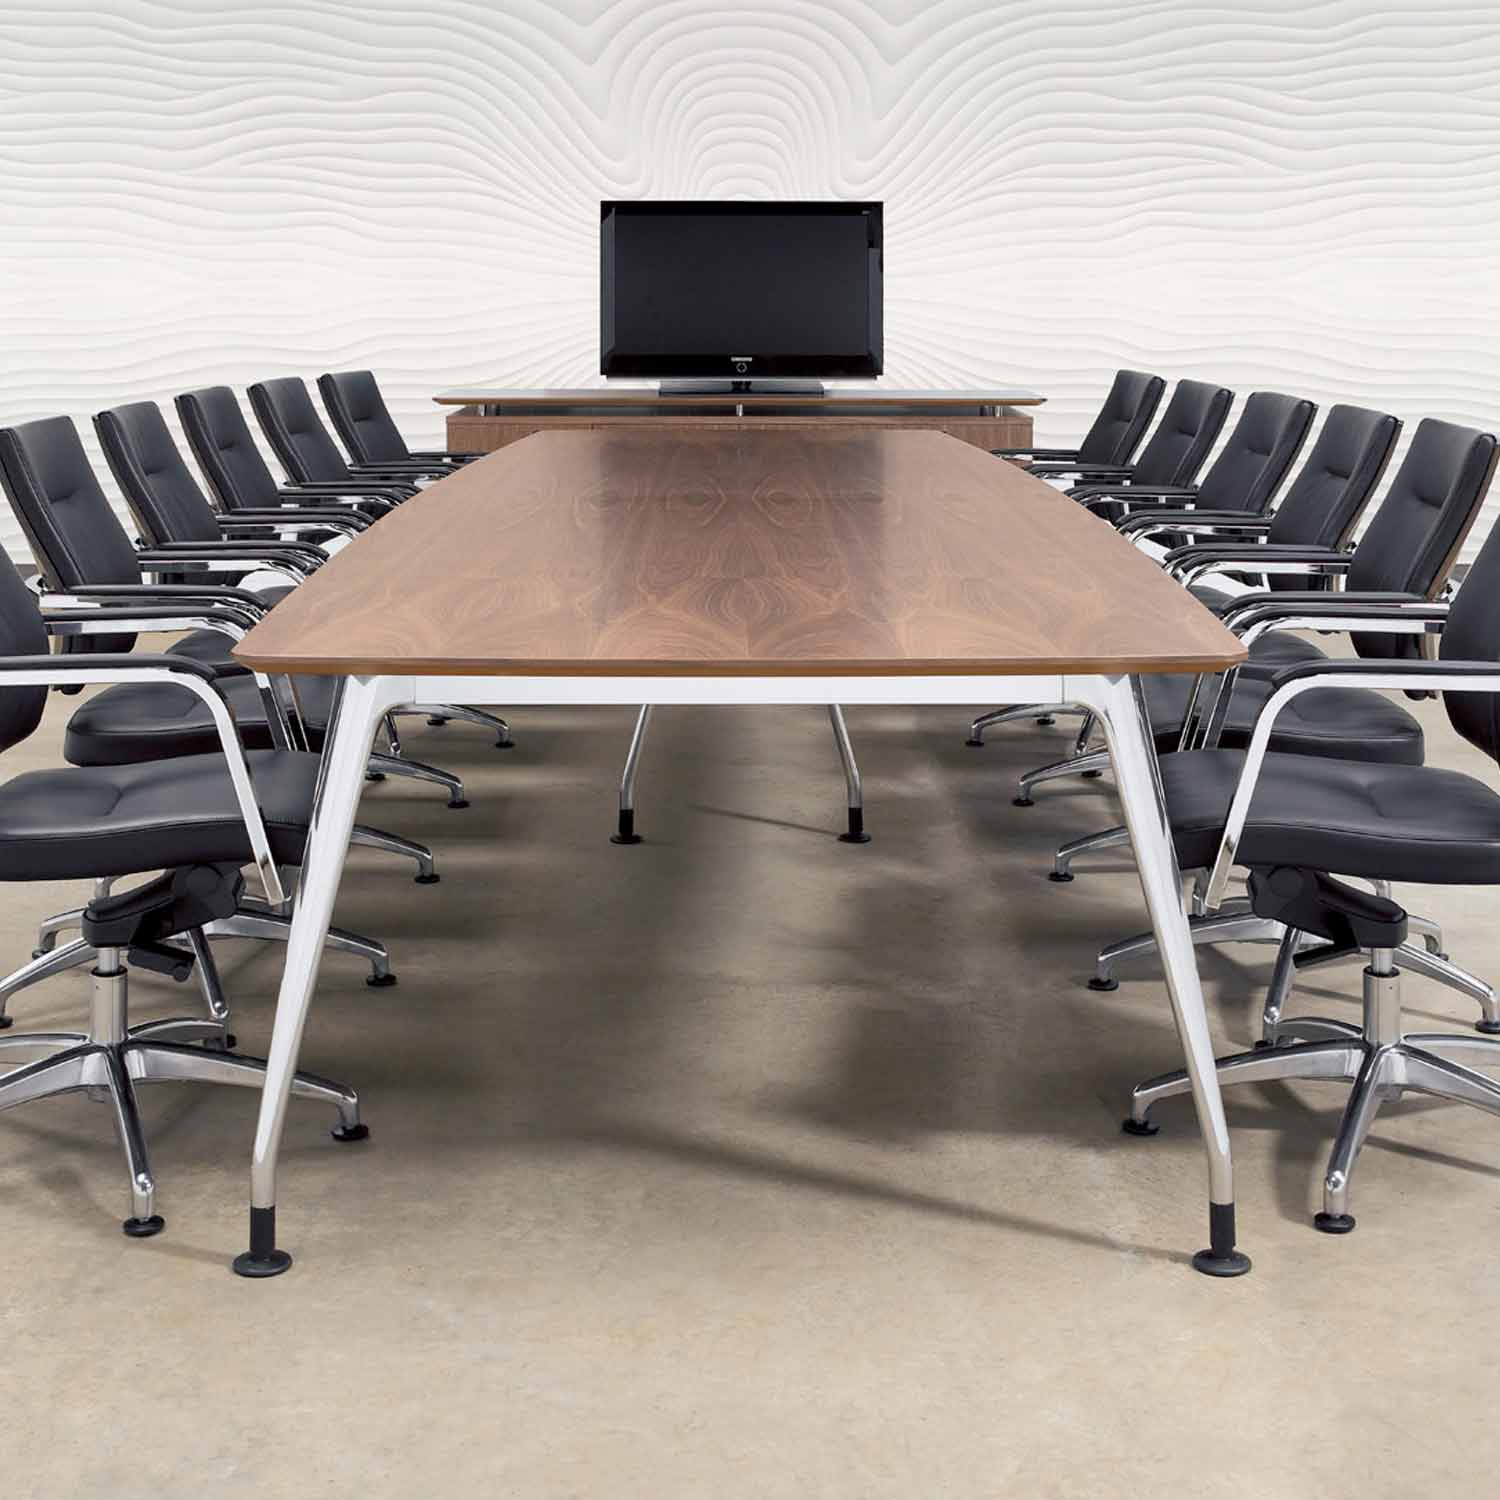 Dna Meeting Table